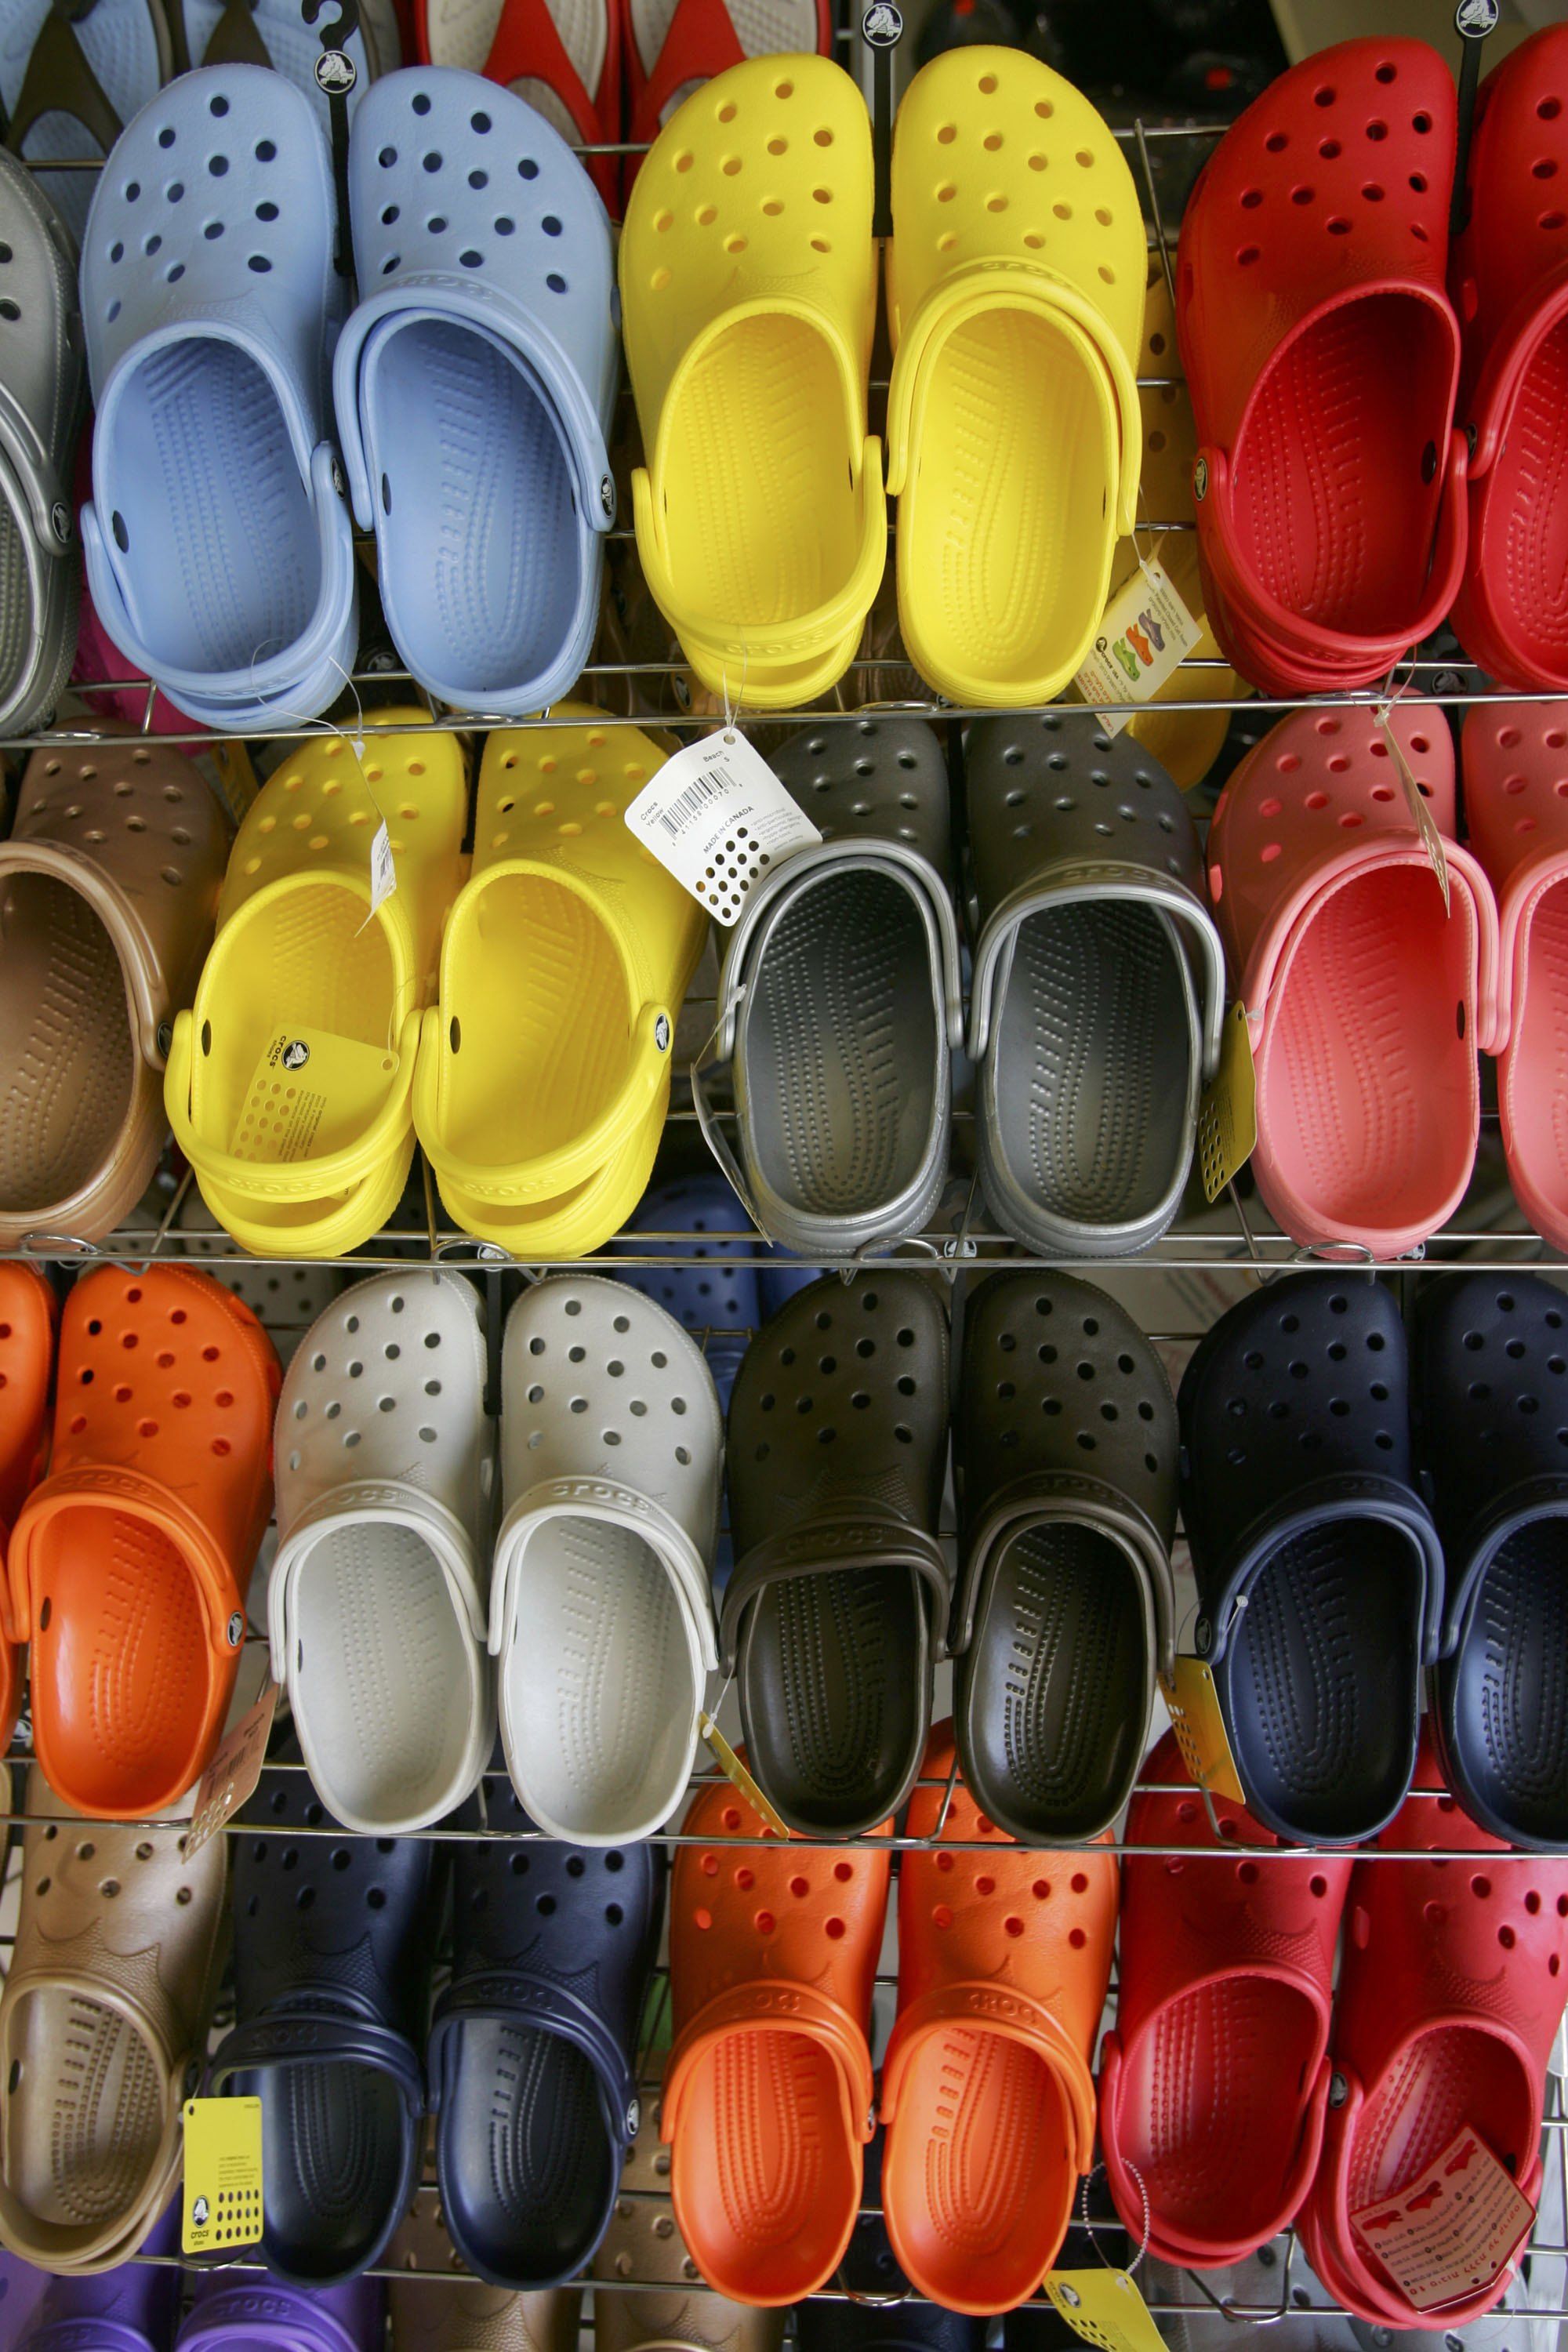 How Crocs Became the Unofficial Shoe of 